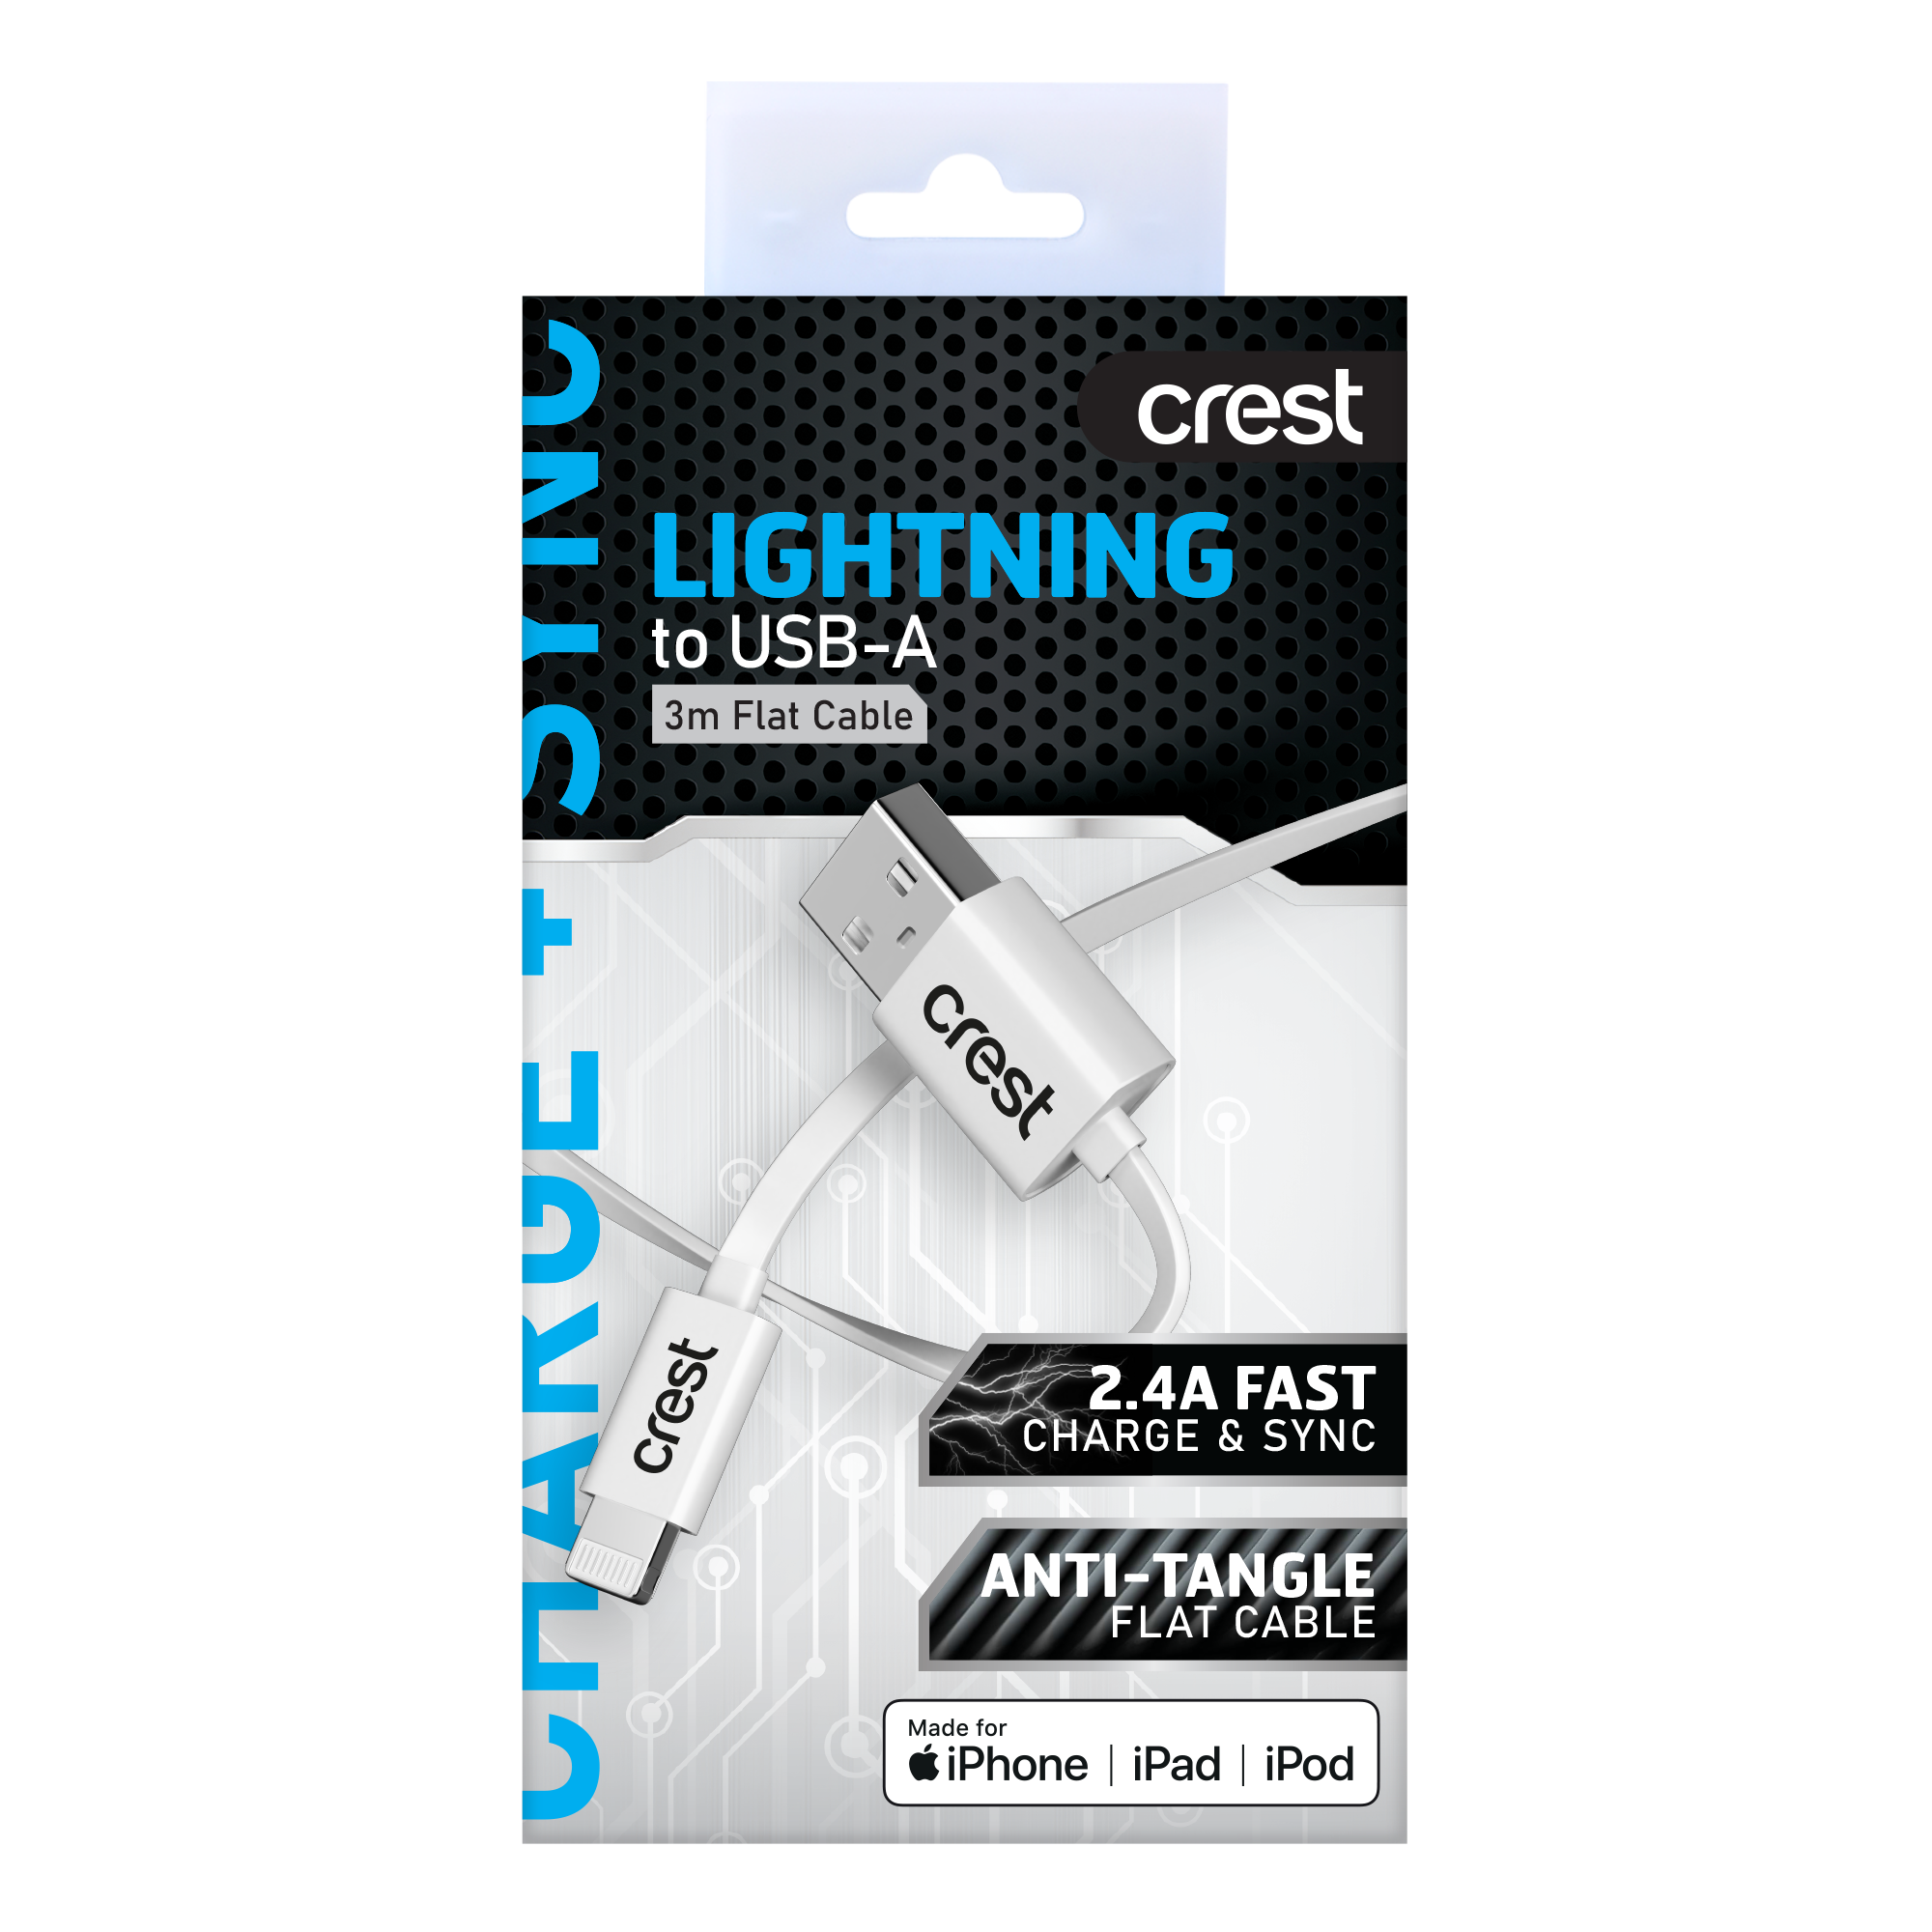 Lightning to USB-A Flat Cable 3M - White